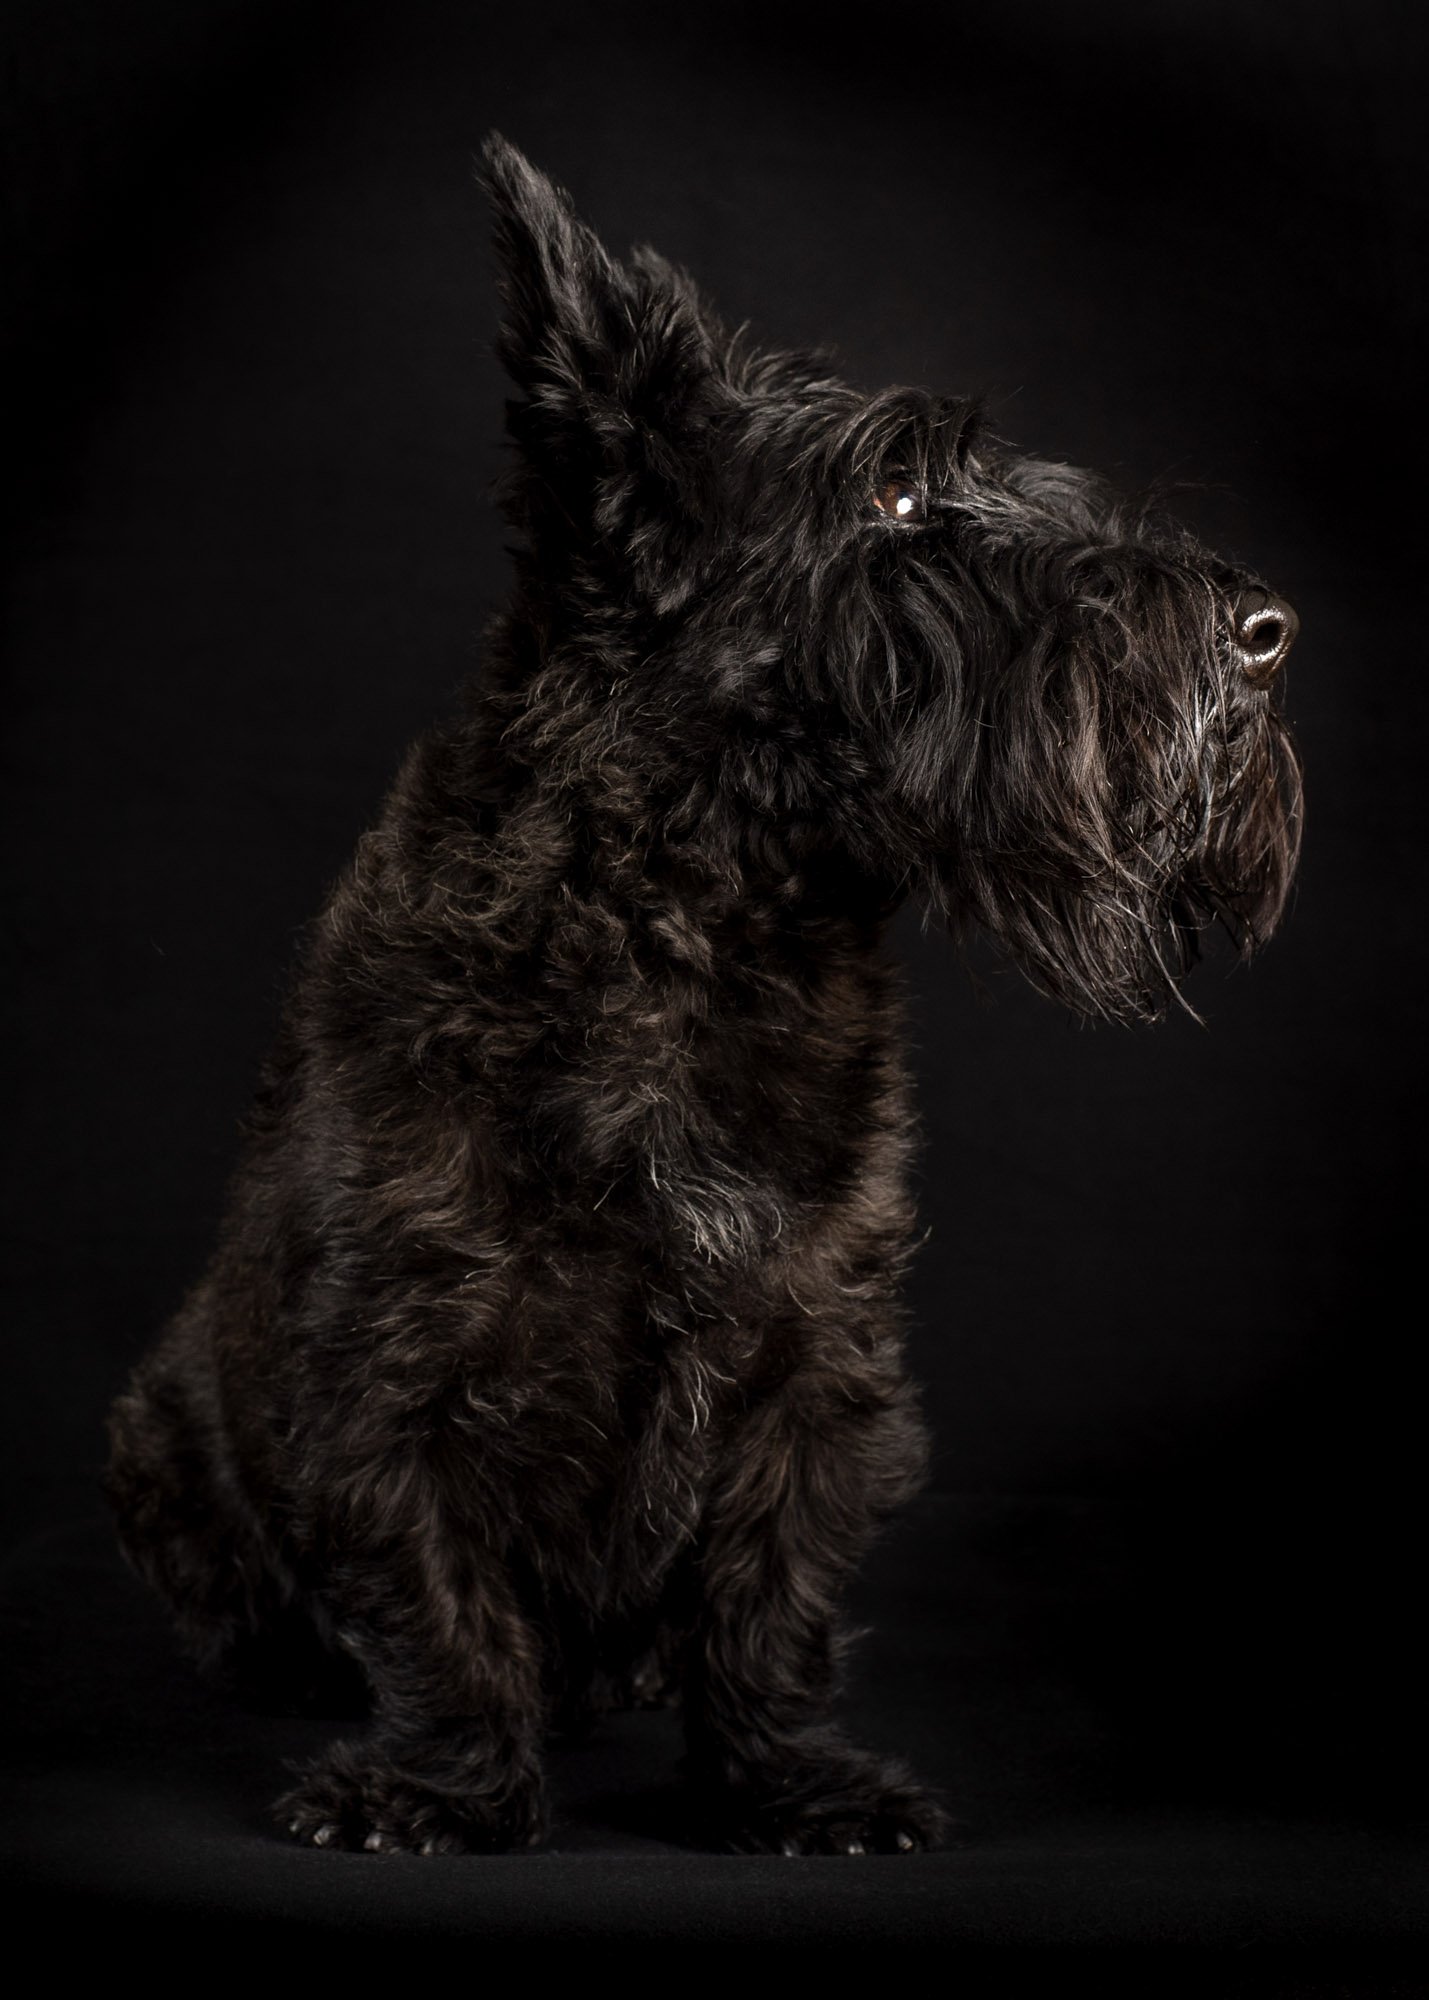 Caninoscuro: The Black Dog Project